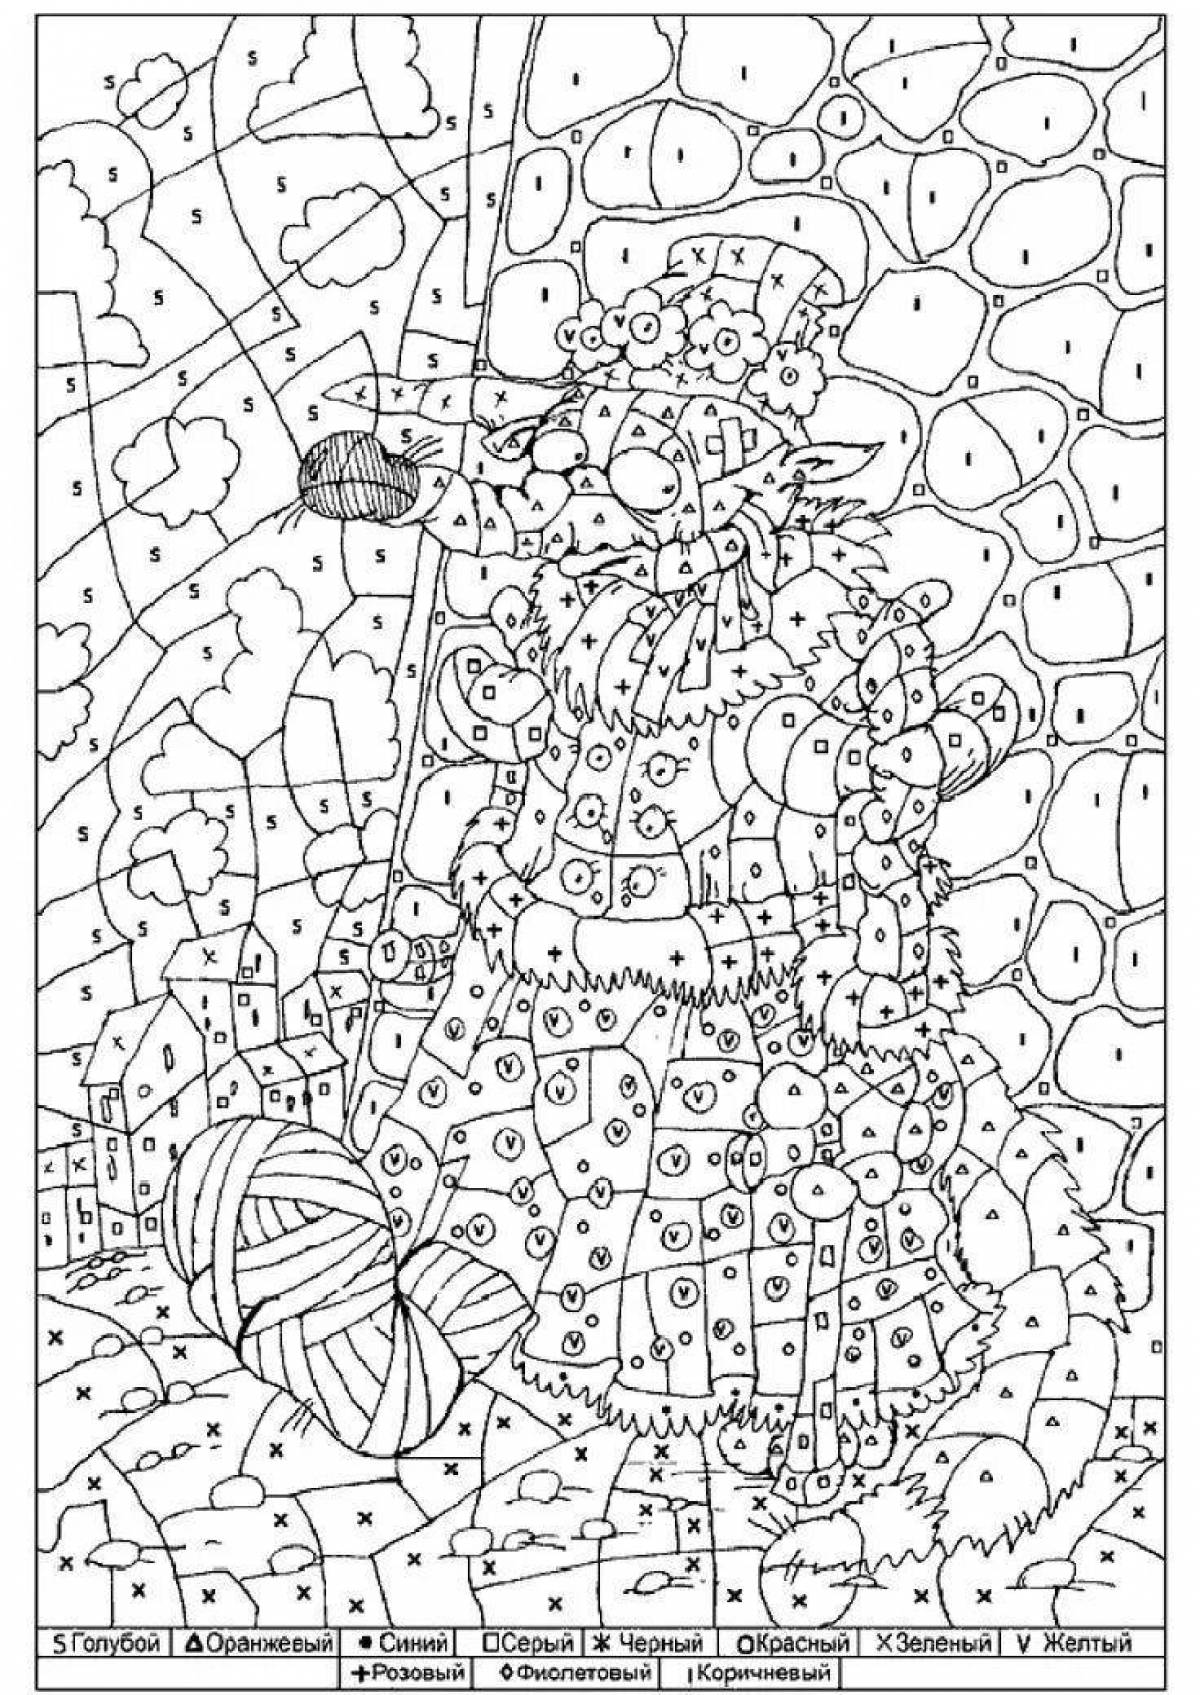 Detailed adult coloring by numbers